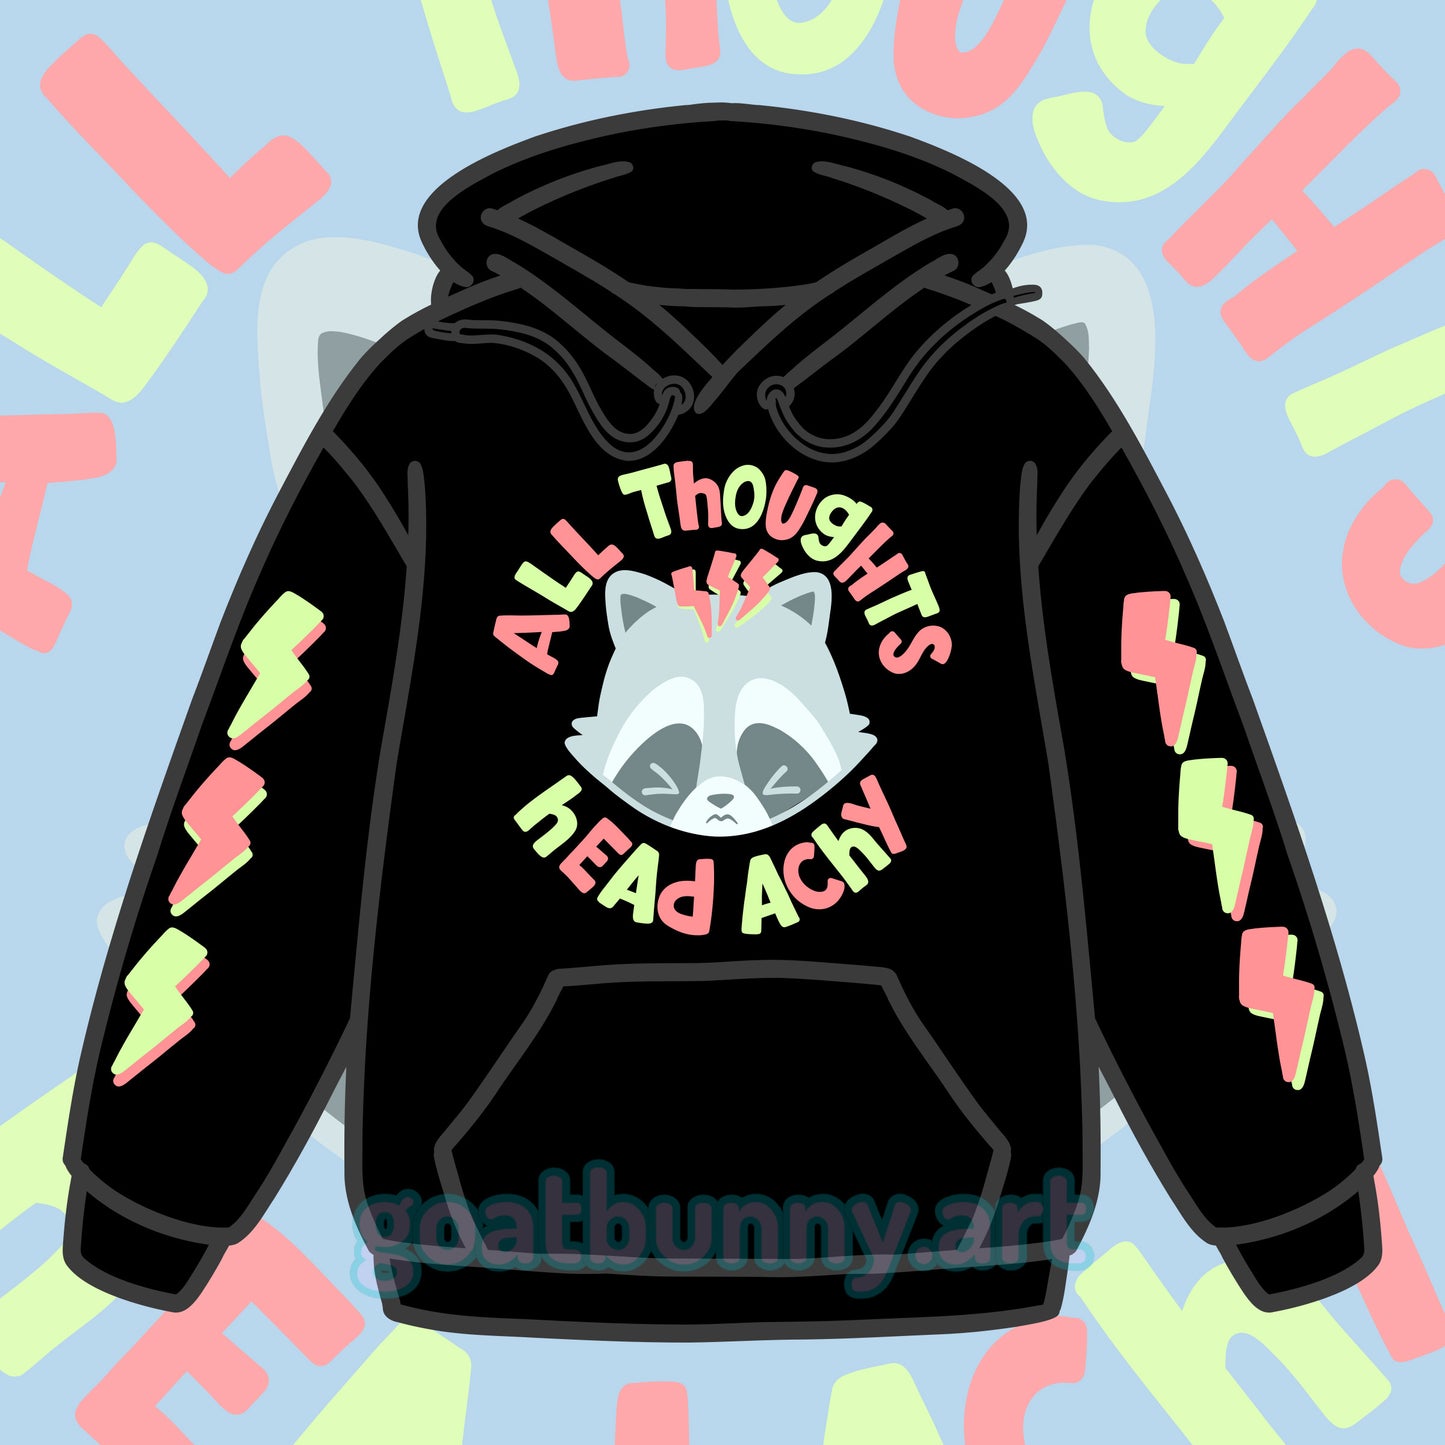 All Thoughts, Head Achy Hoodie